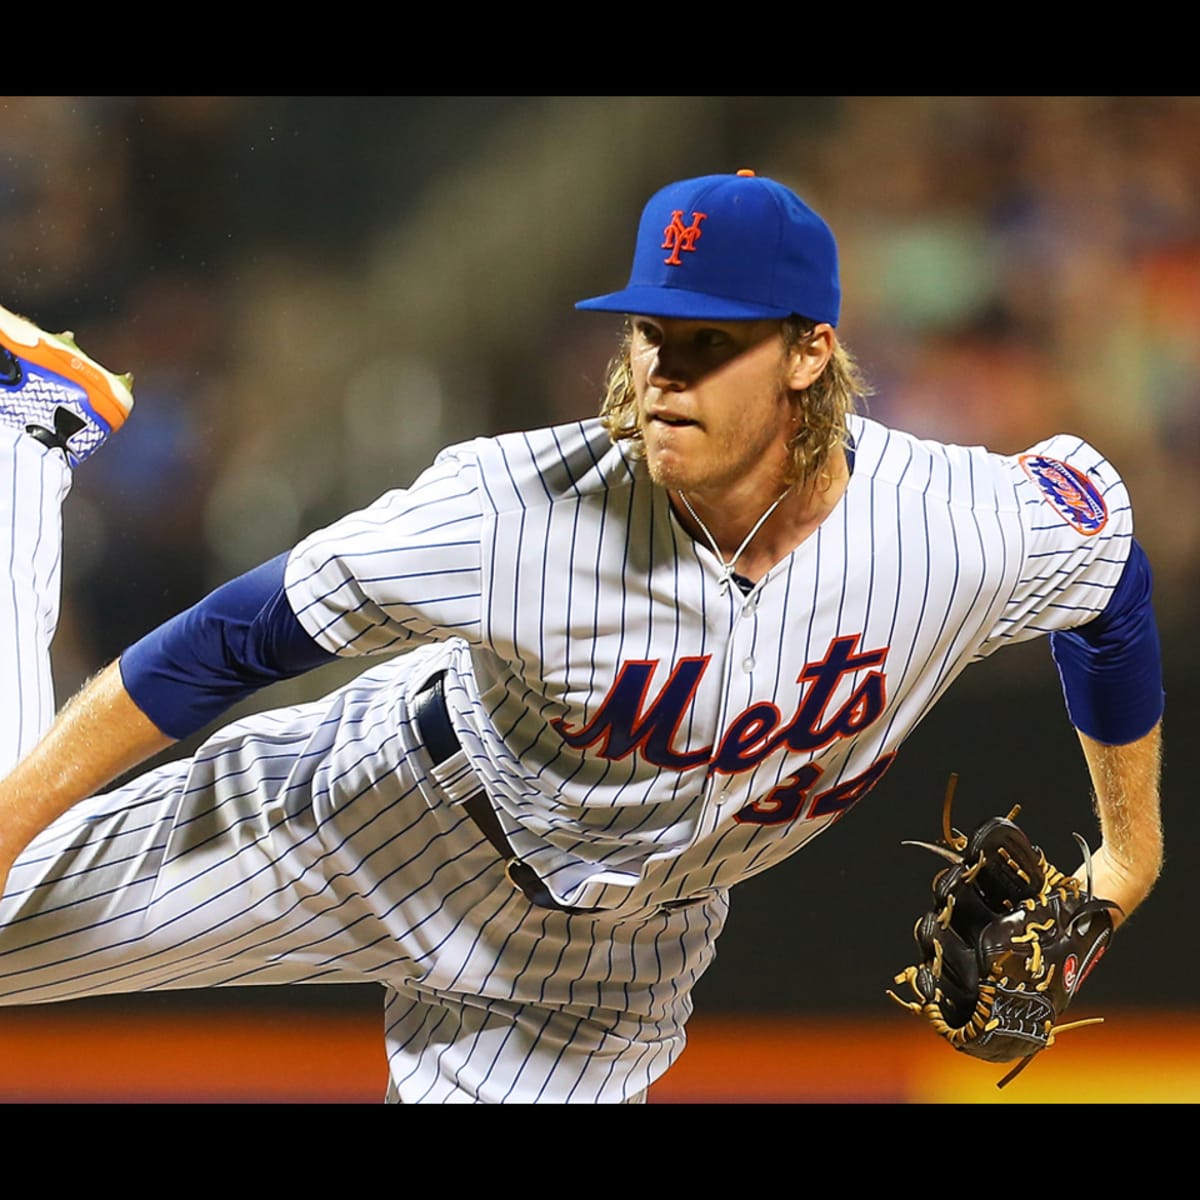 Noah Syndergaard Added 17 Pounds of Muscle. Here's How He Did It